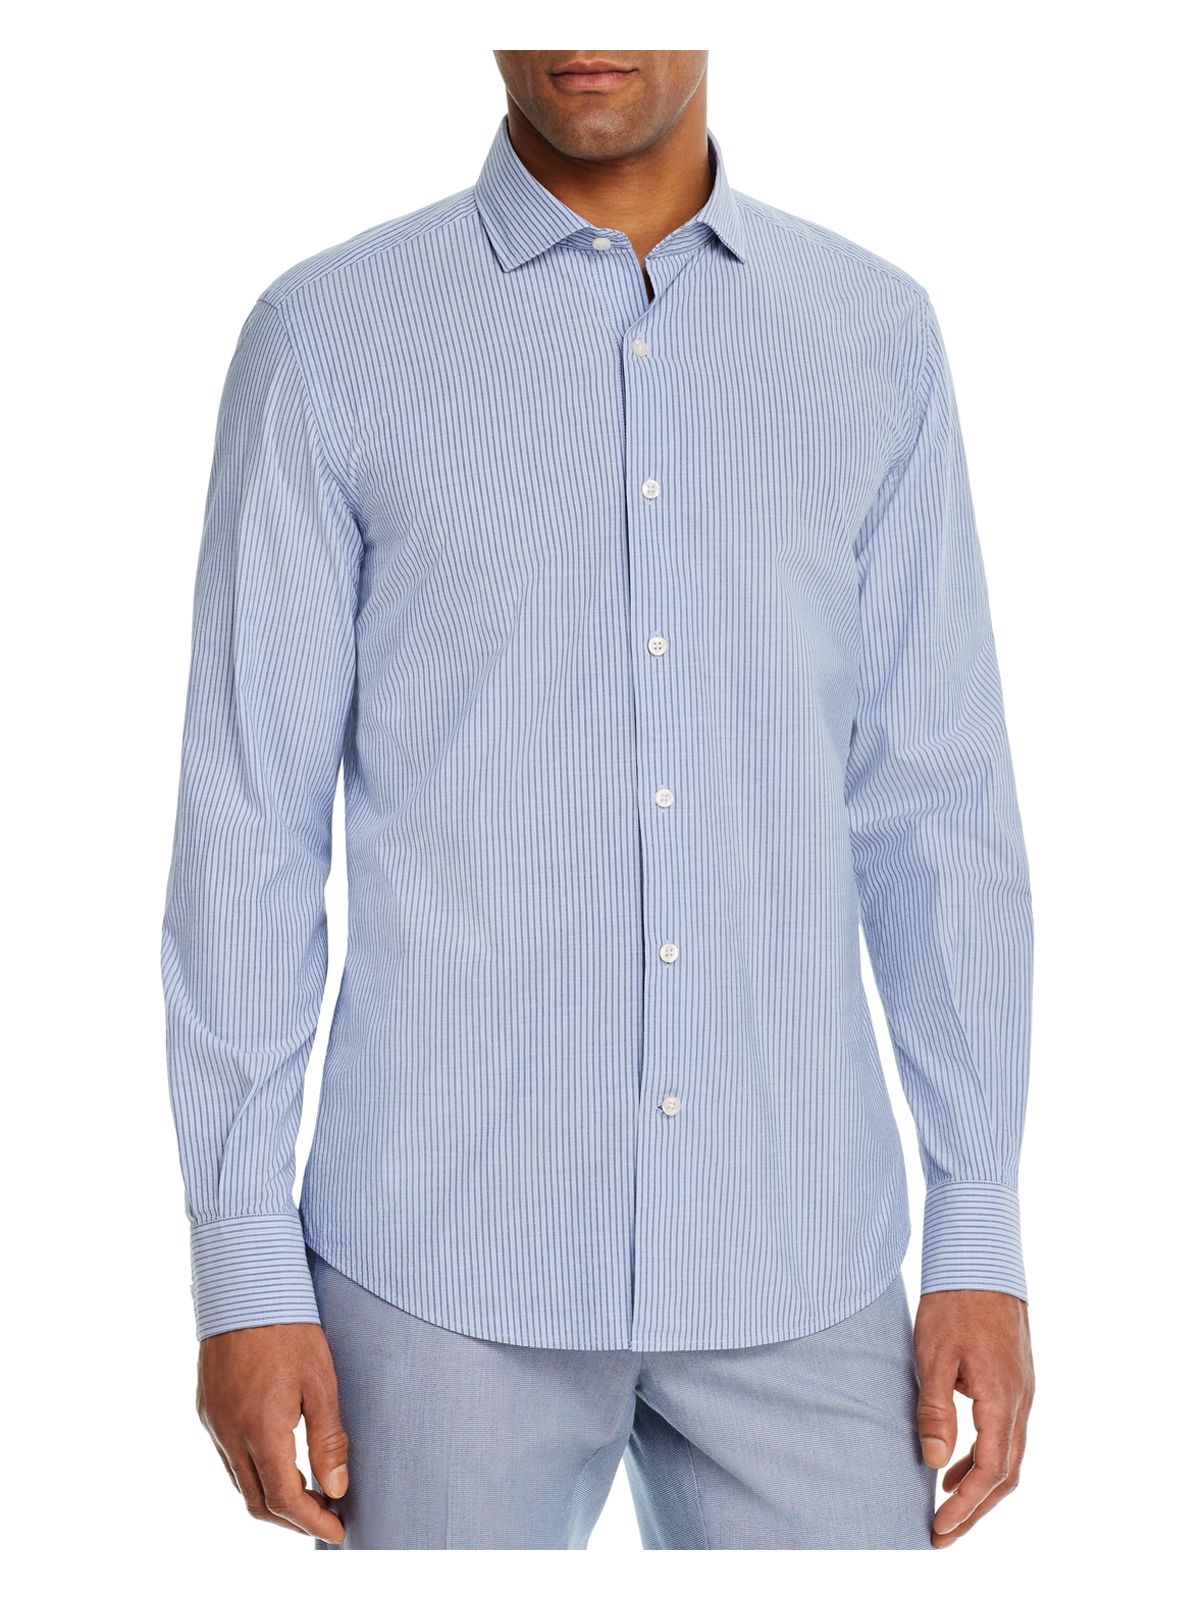 DYLAN GRAY Mens Light Blue Check Button Down Casual Shirt S